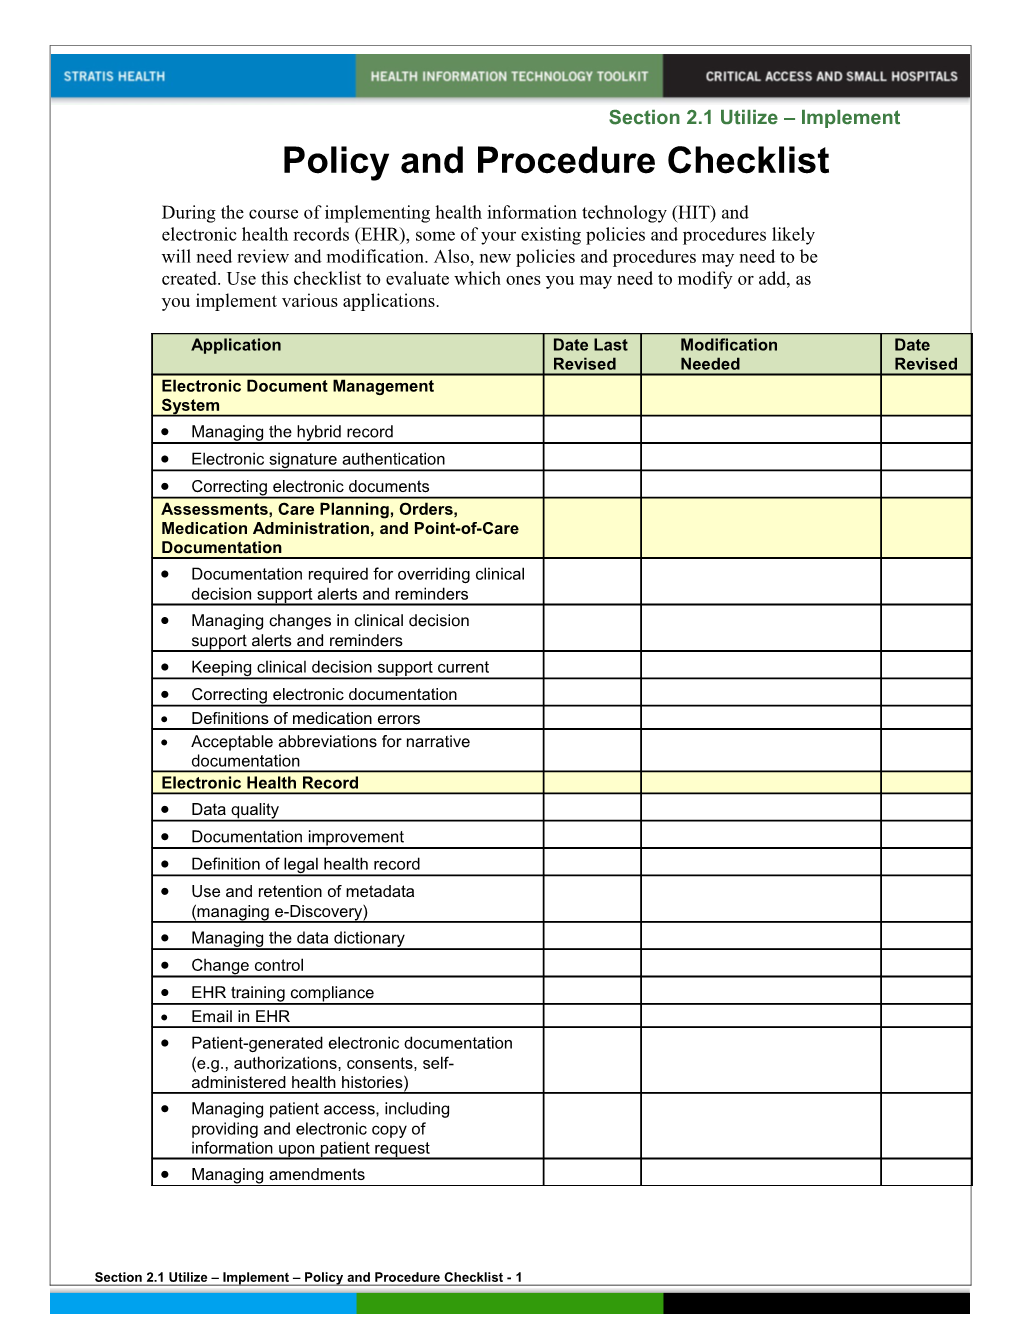 Policy and Procedure Checklist